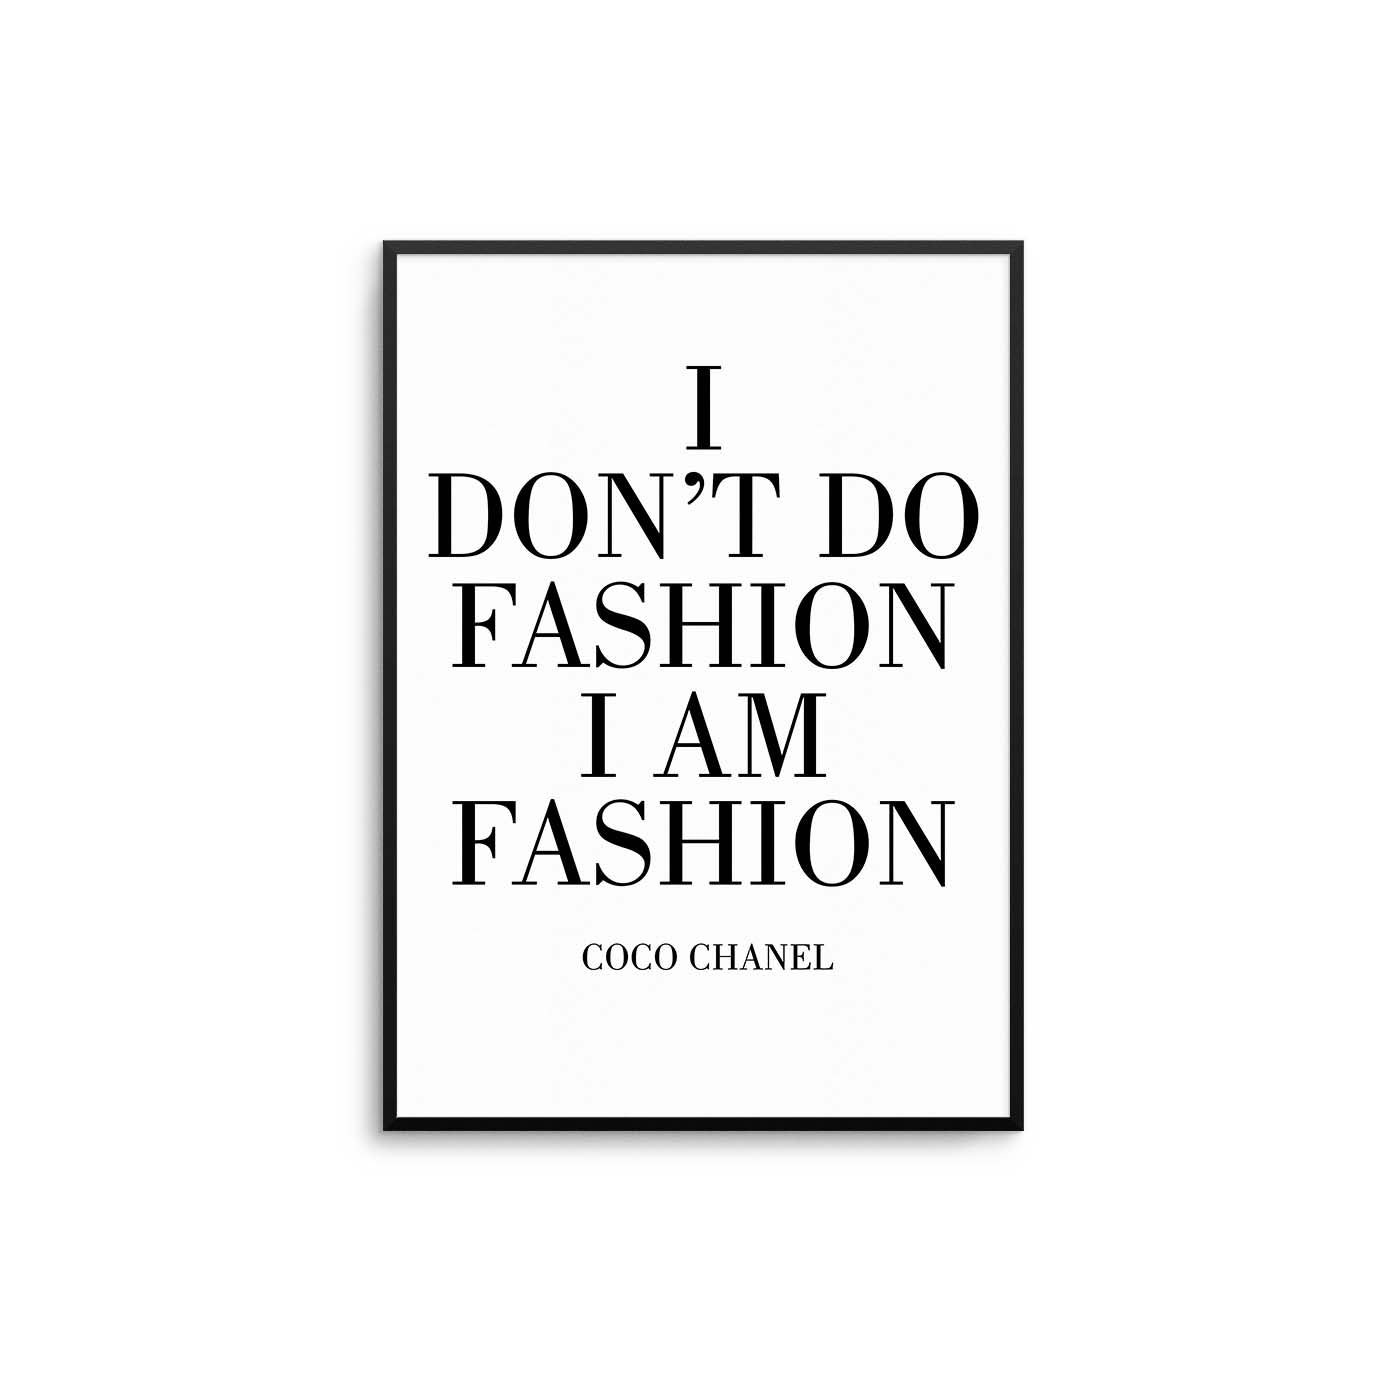 I Don't Do Fashion Poster - D'Luxe Prints